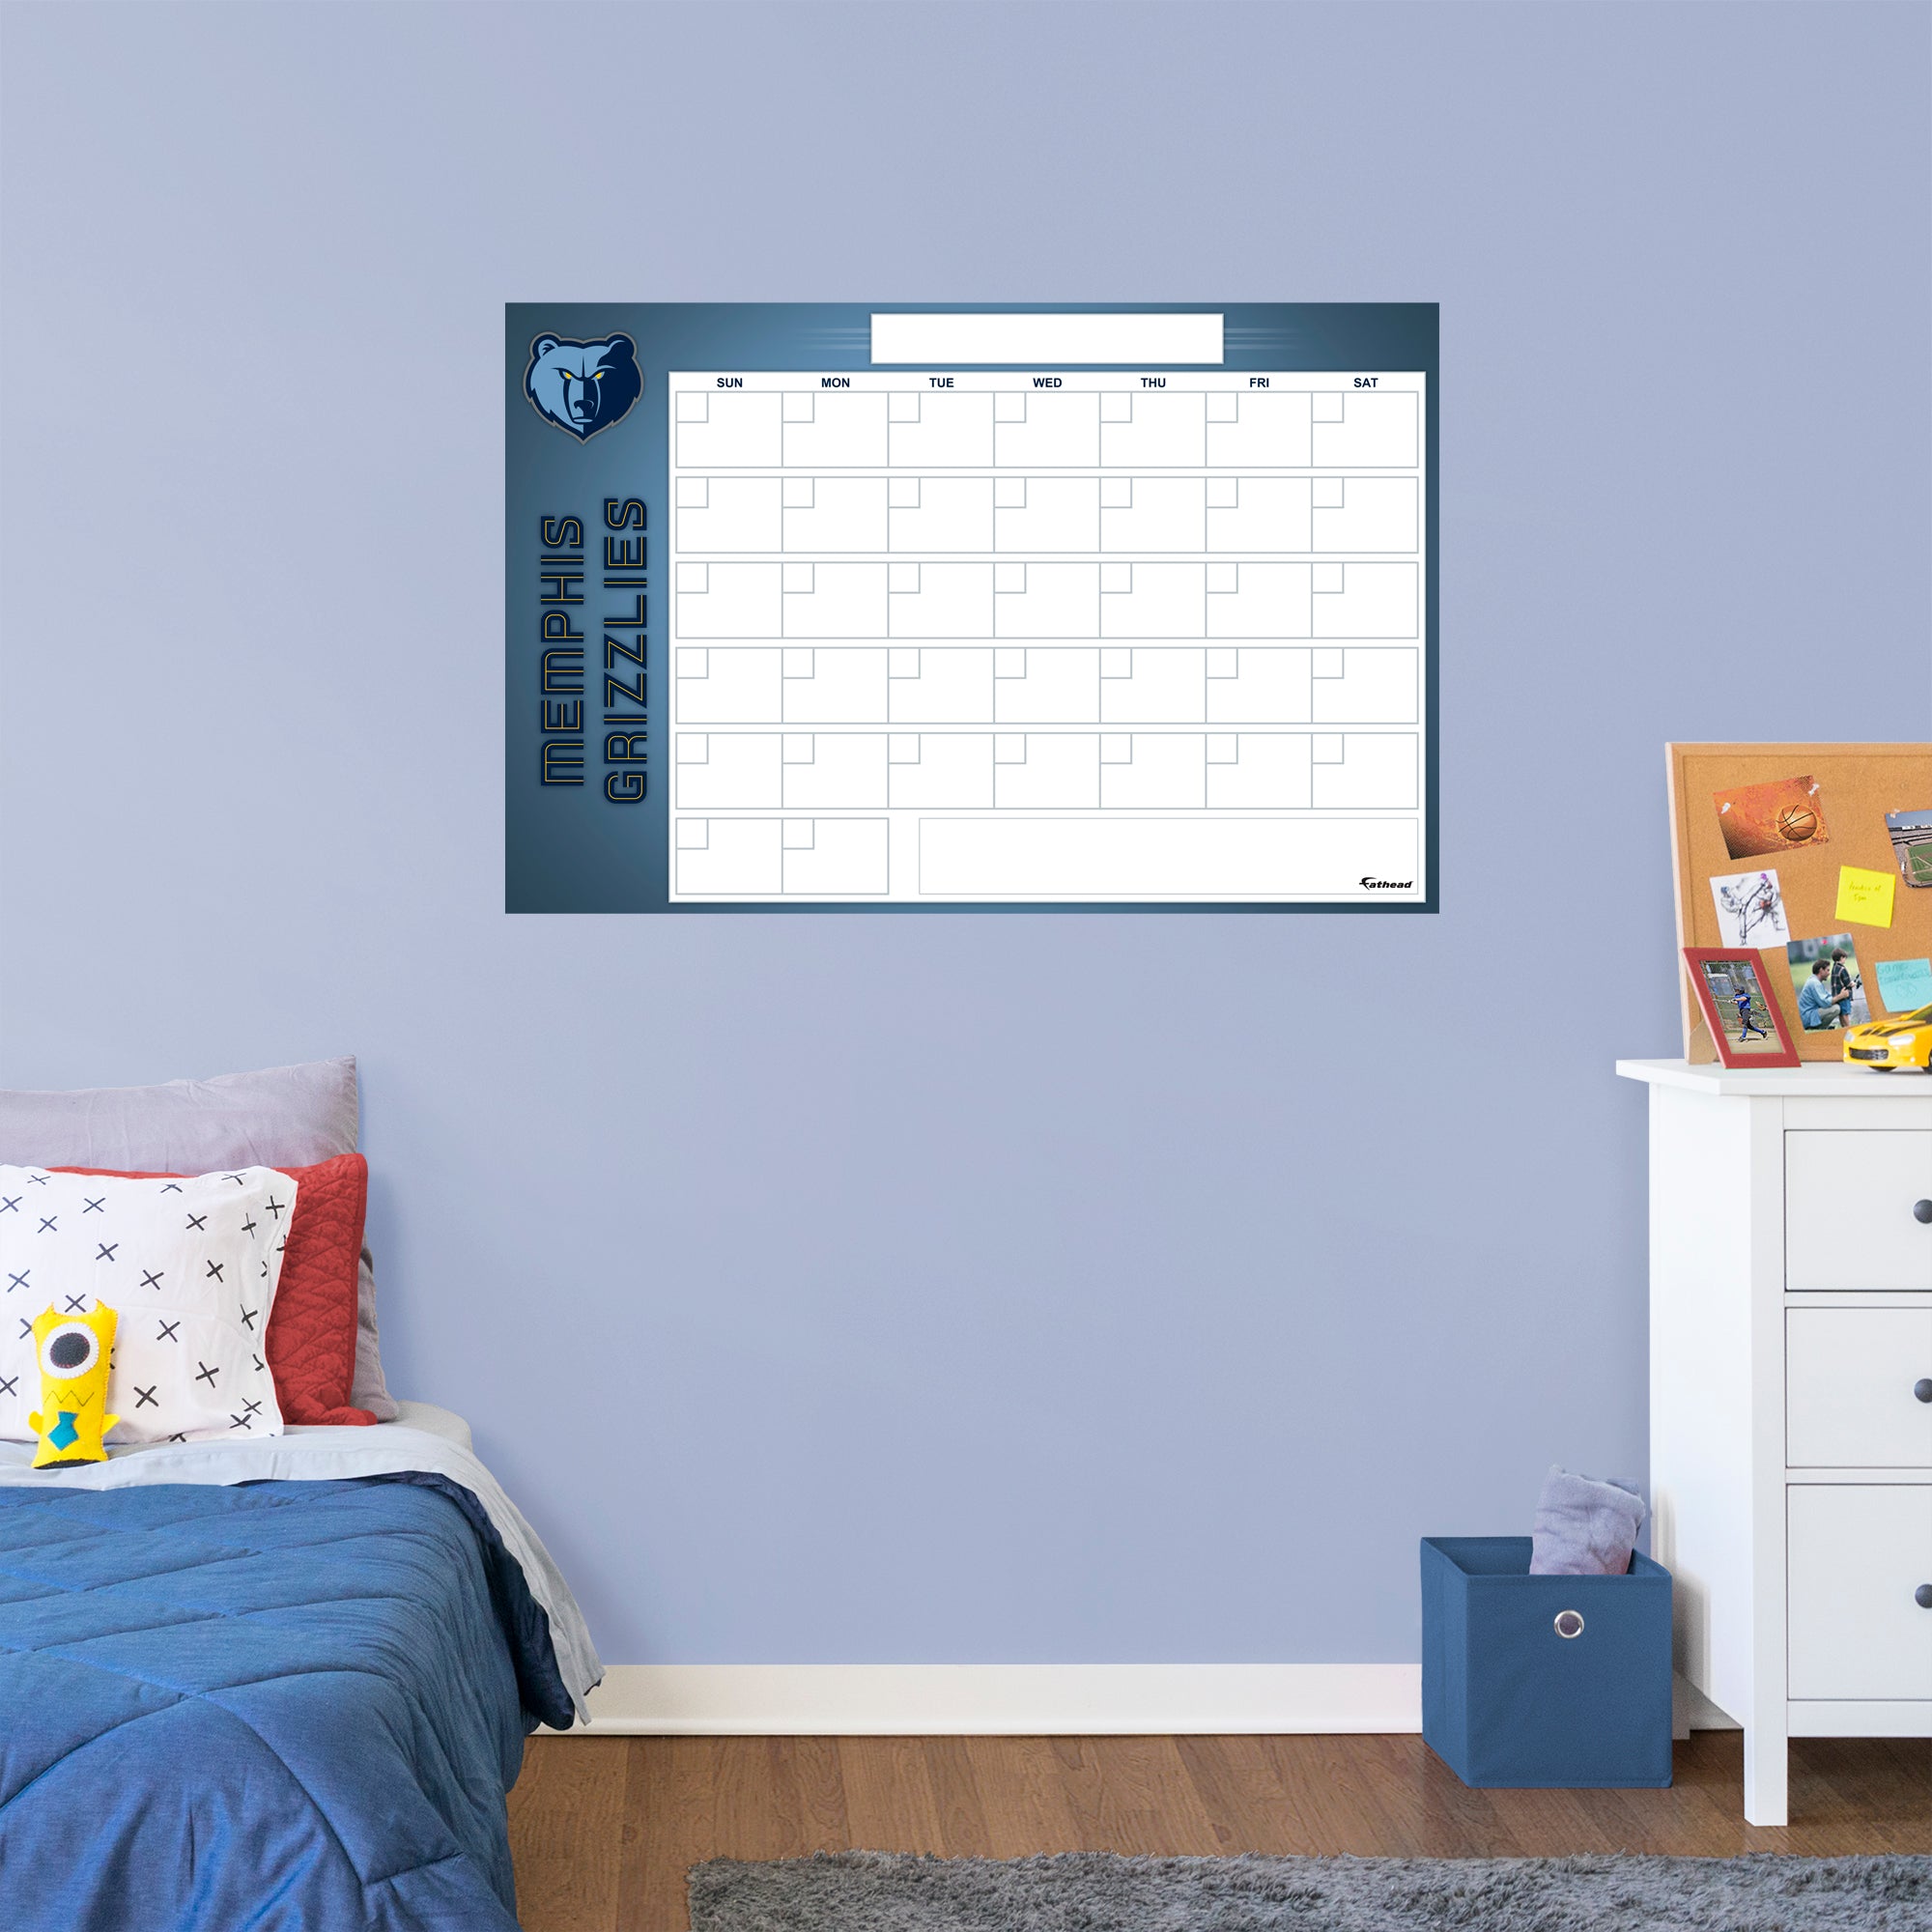 Memphis Grizzlies Dry Erase Calendar - Officially Licensed NBA Removable Wall Decal Giant Decal (34"W x 52"H) by Fathead | Vinyl